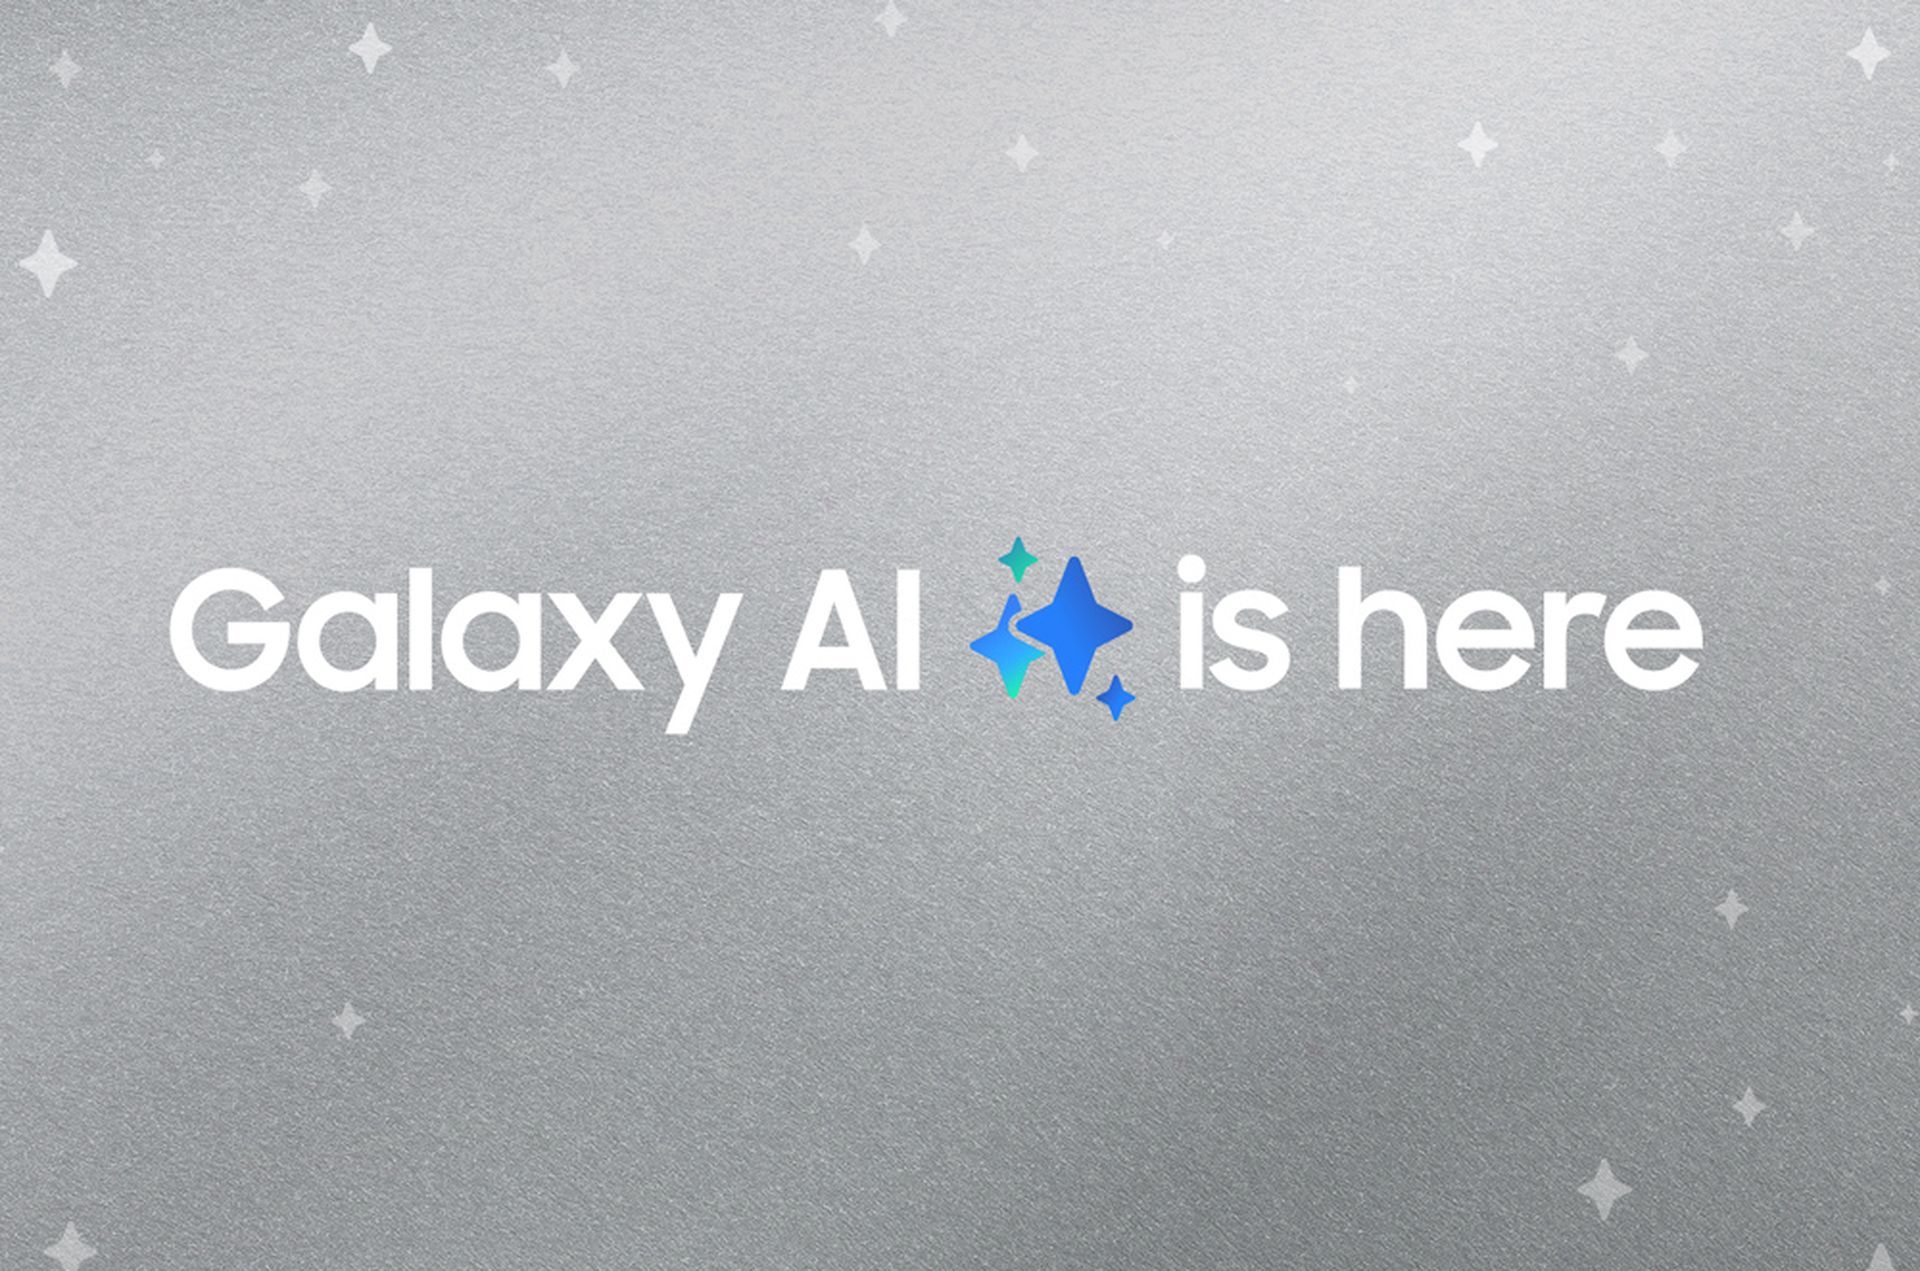 Older Samsung phones will welcome Galaxy AI with One UI 6.1 update